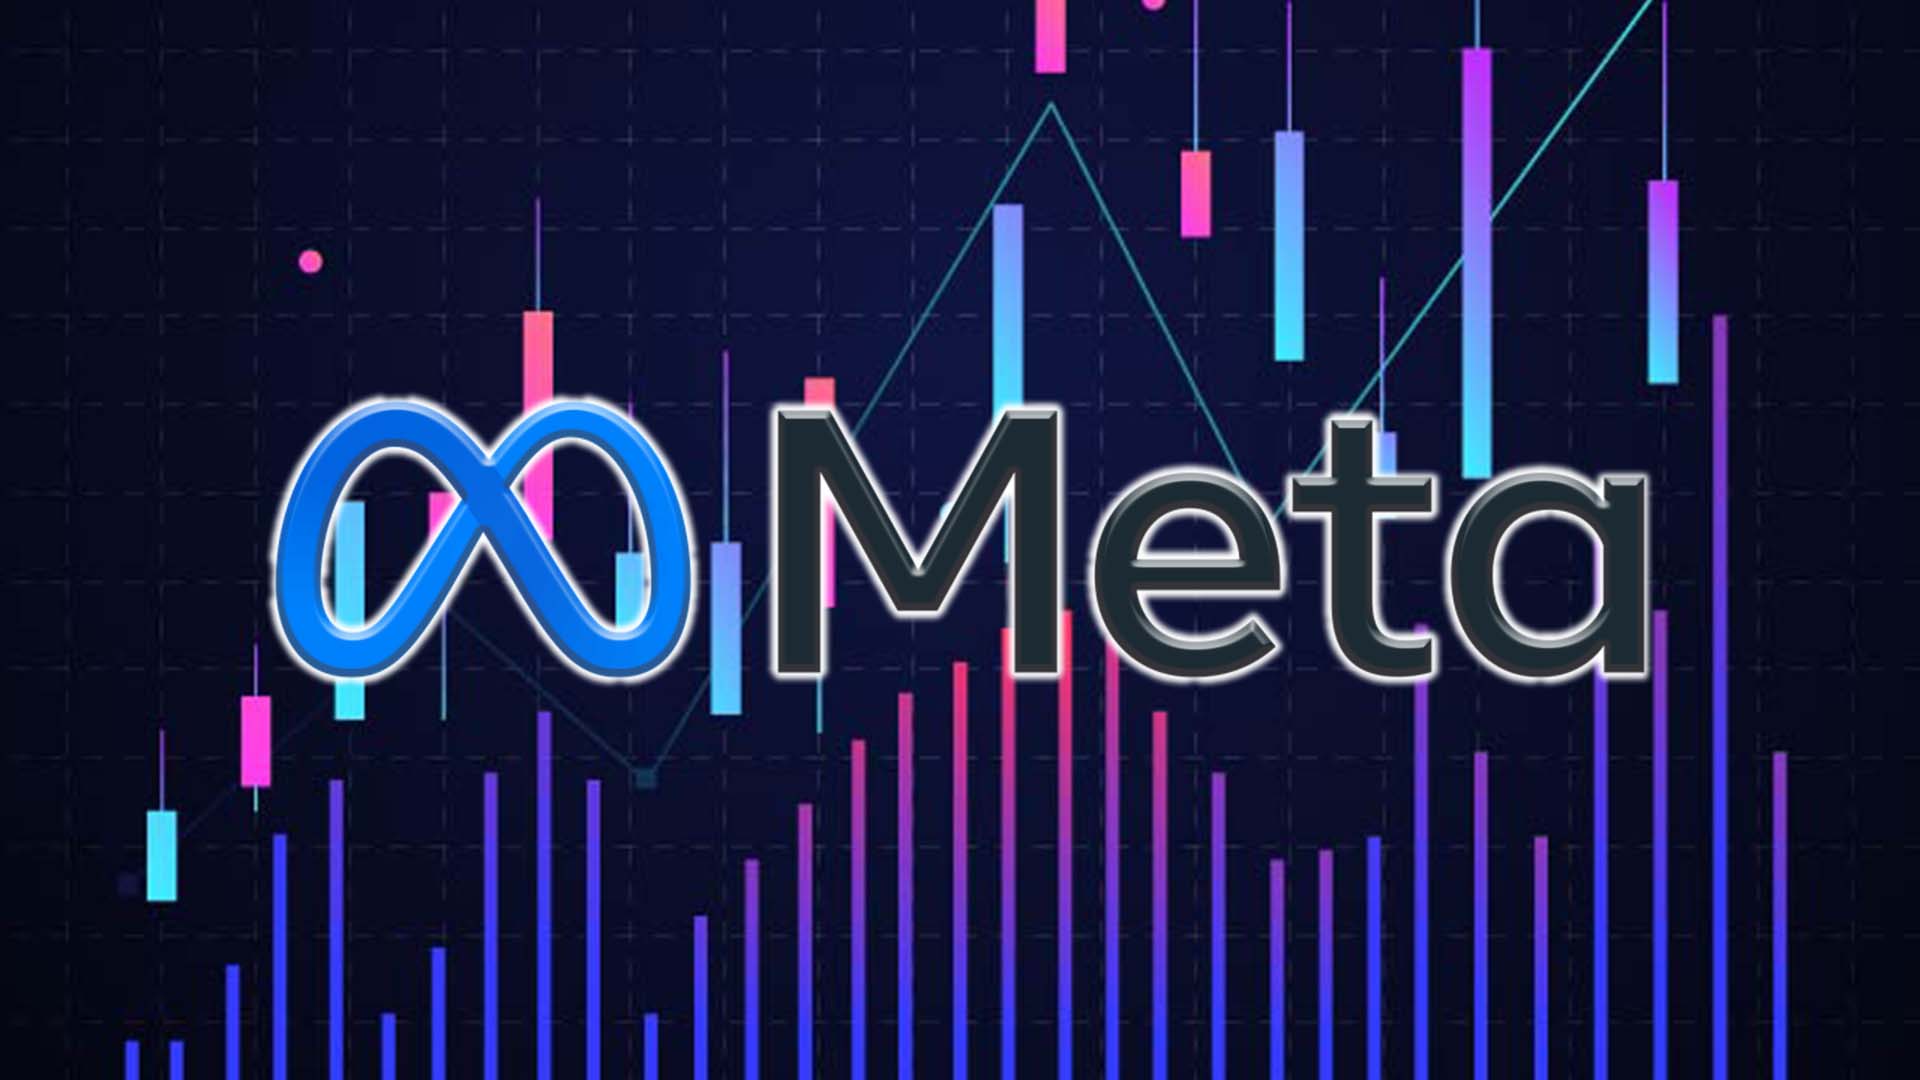 Meta Stock Price Hit 85 Month Low, Can We Buy At The Price Point?